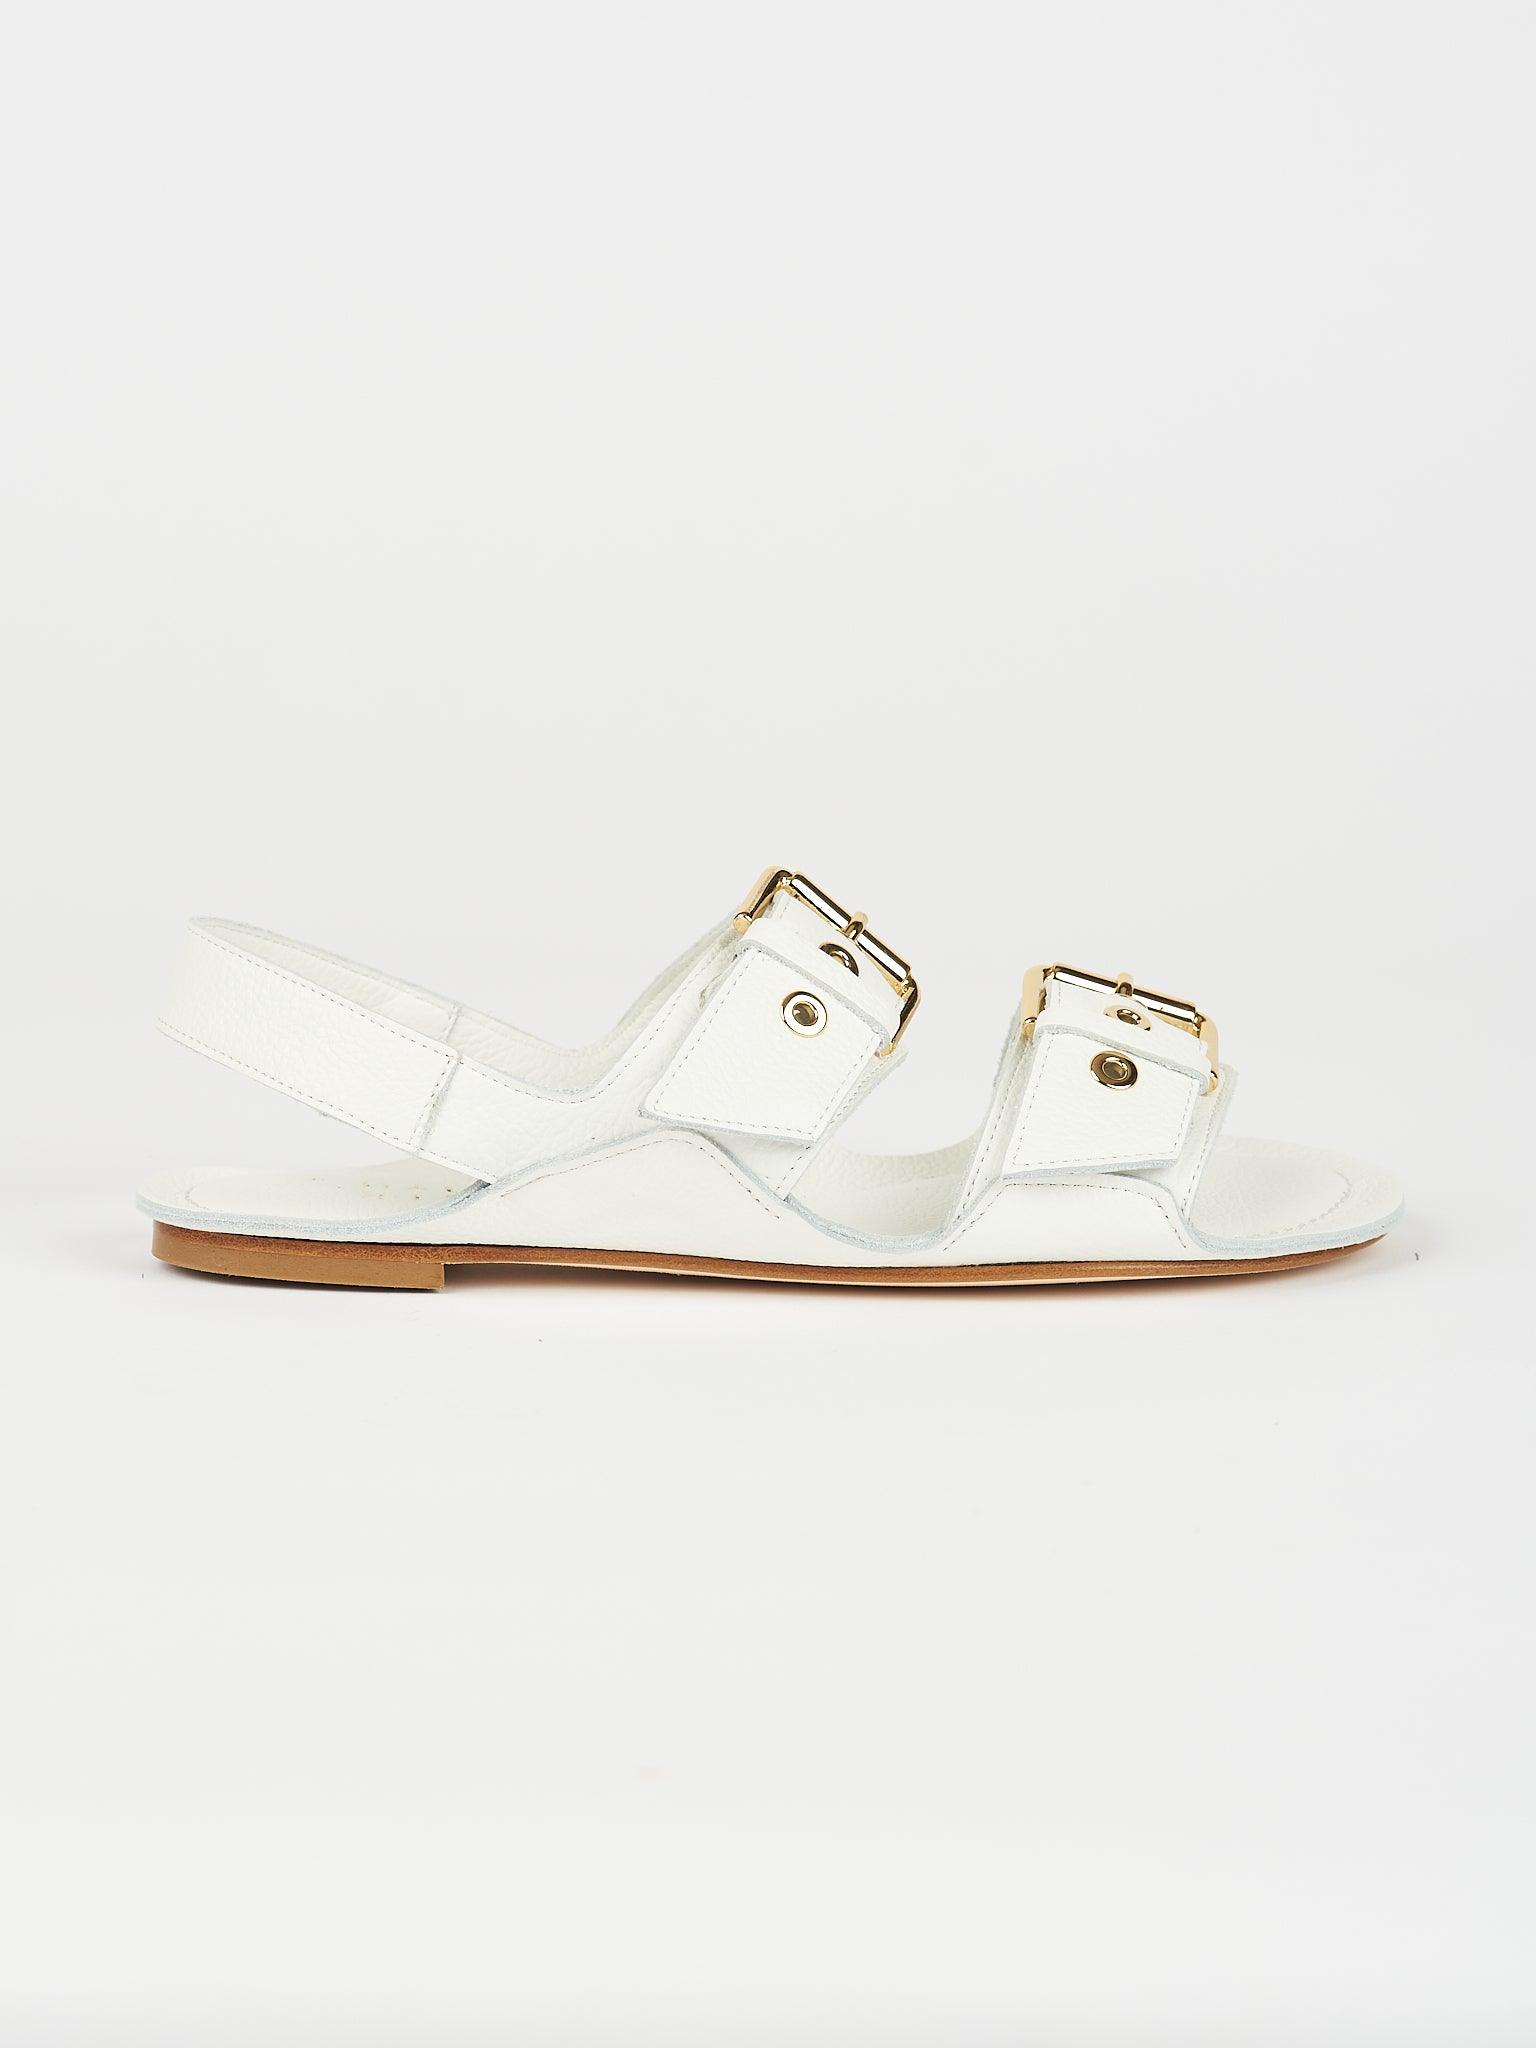 Double Buckle Sandal in White Side View